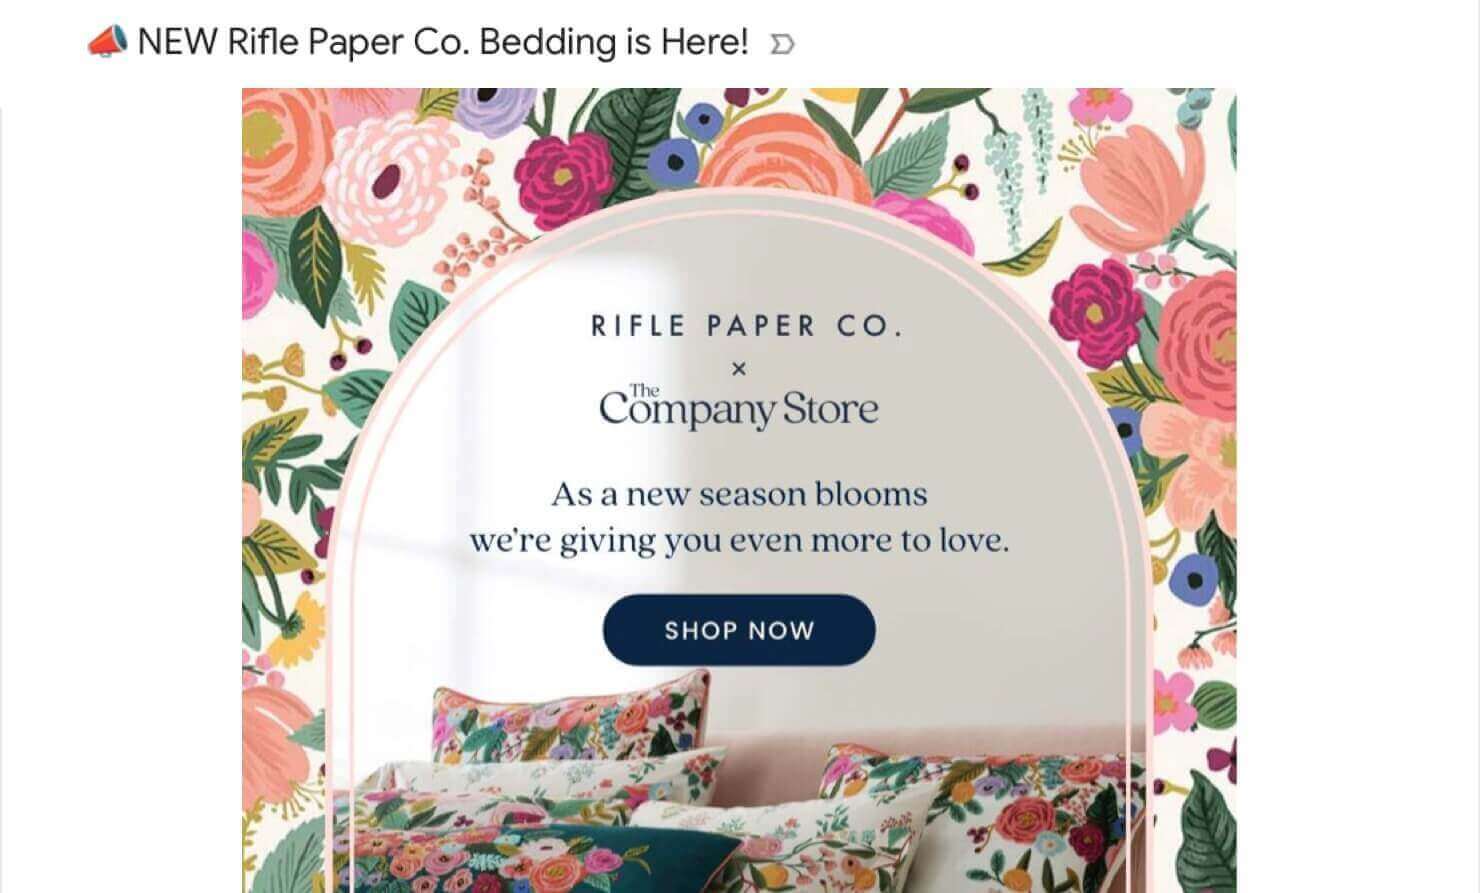 eCommerce marketing email from The Company Store. Subject line says "NEW Rifle Paper Co. Bedding is Here!" Email says, "RIFLE PAPER CO x The Company Store. As a new season blooms we're giving you even more to love." CTA button says "Shop Now." Photo of bedding with floral designs.